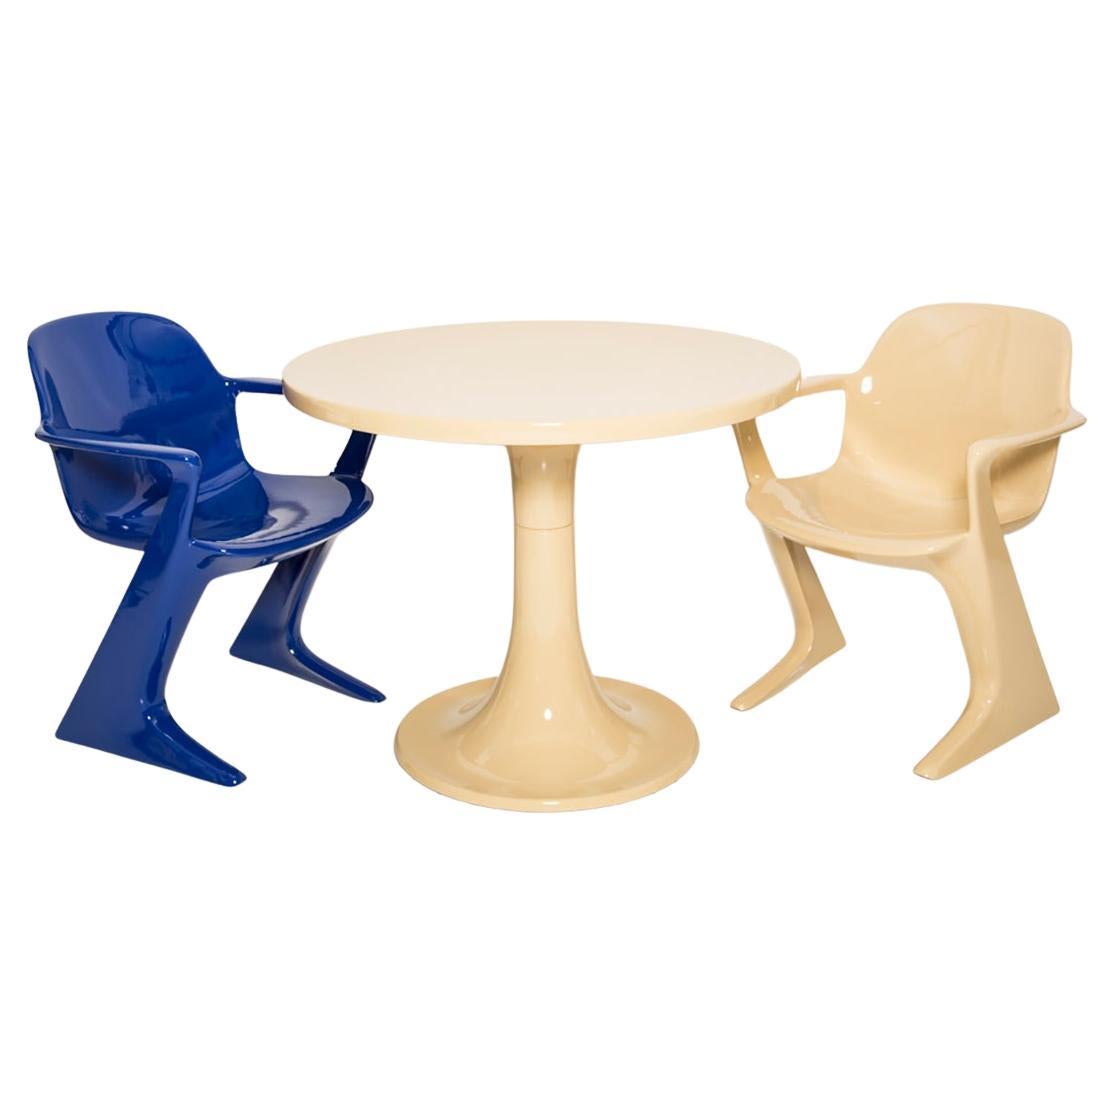 Midcentury Beige and Blue Kangaroo Chairs and Table Ernst Moeckl, Germany, 1968